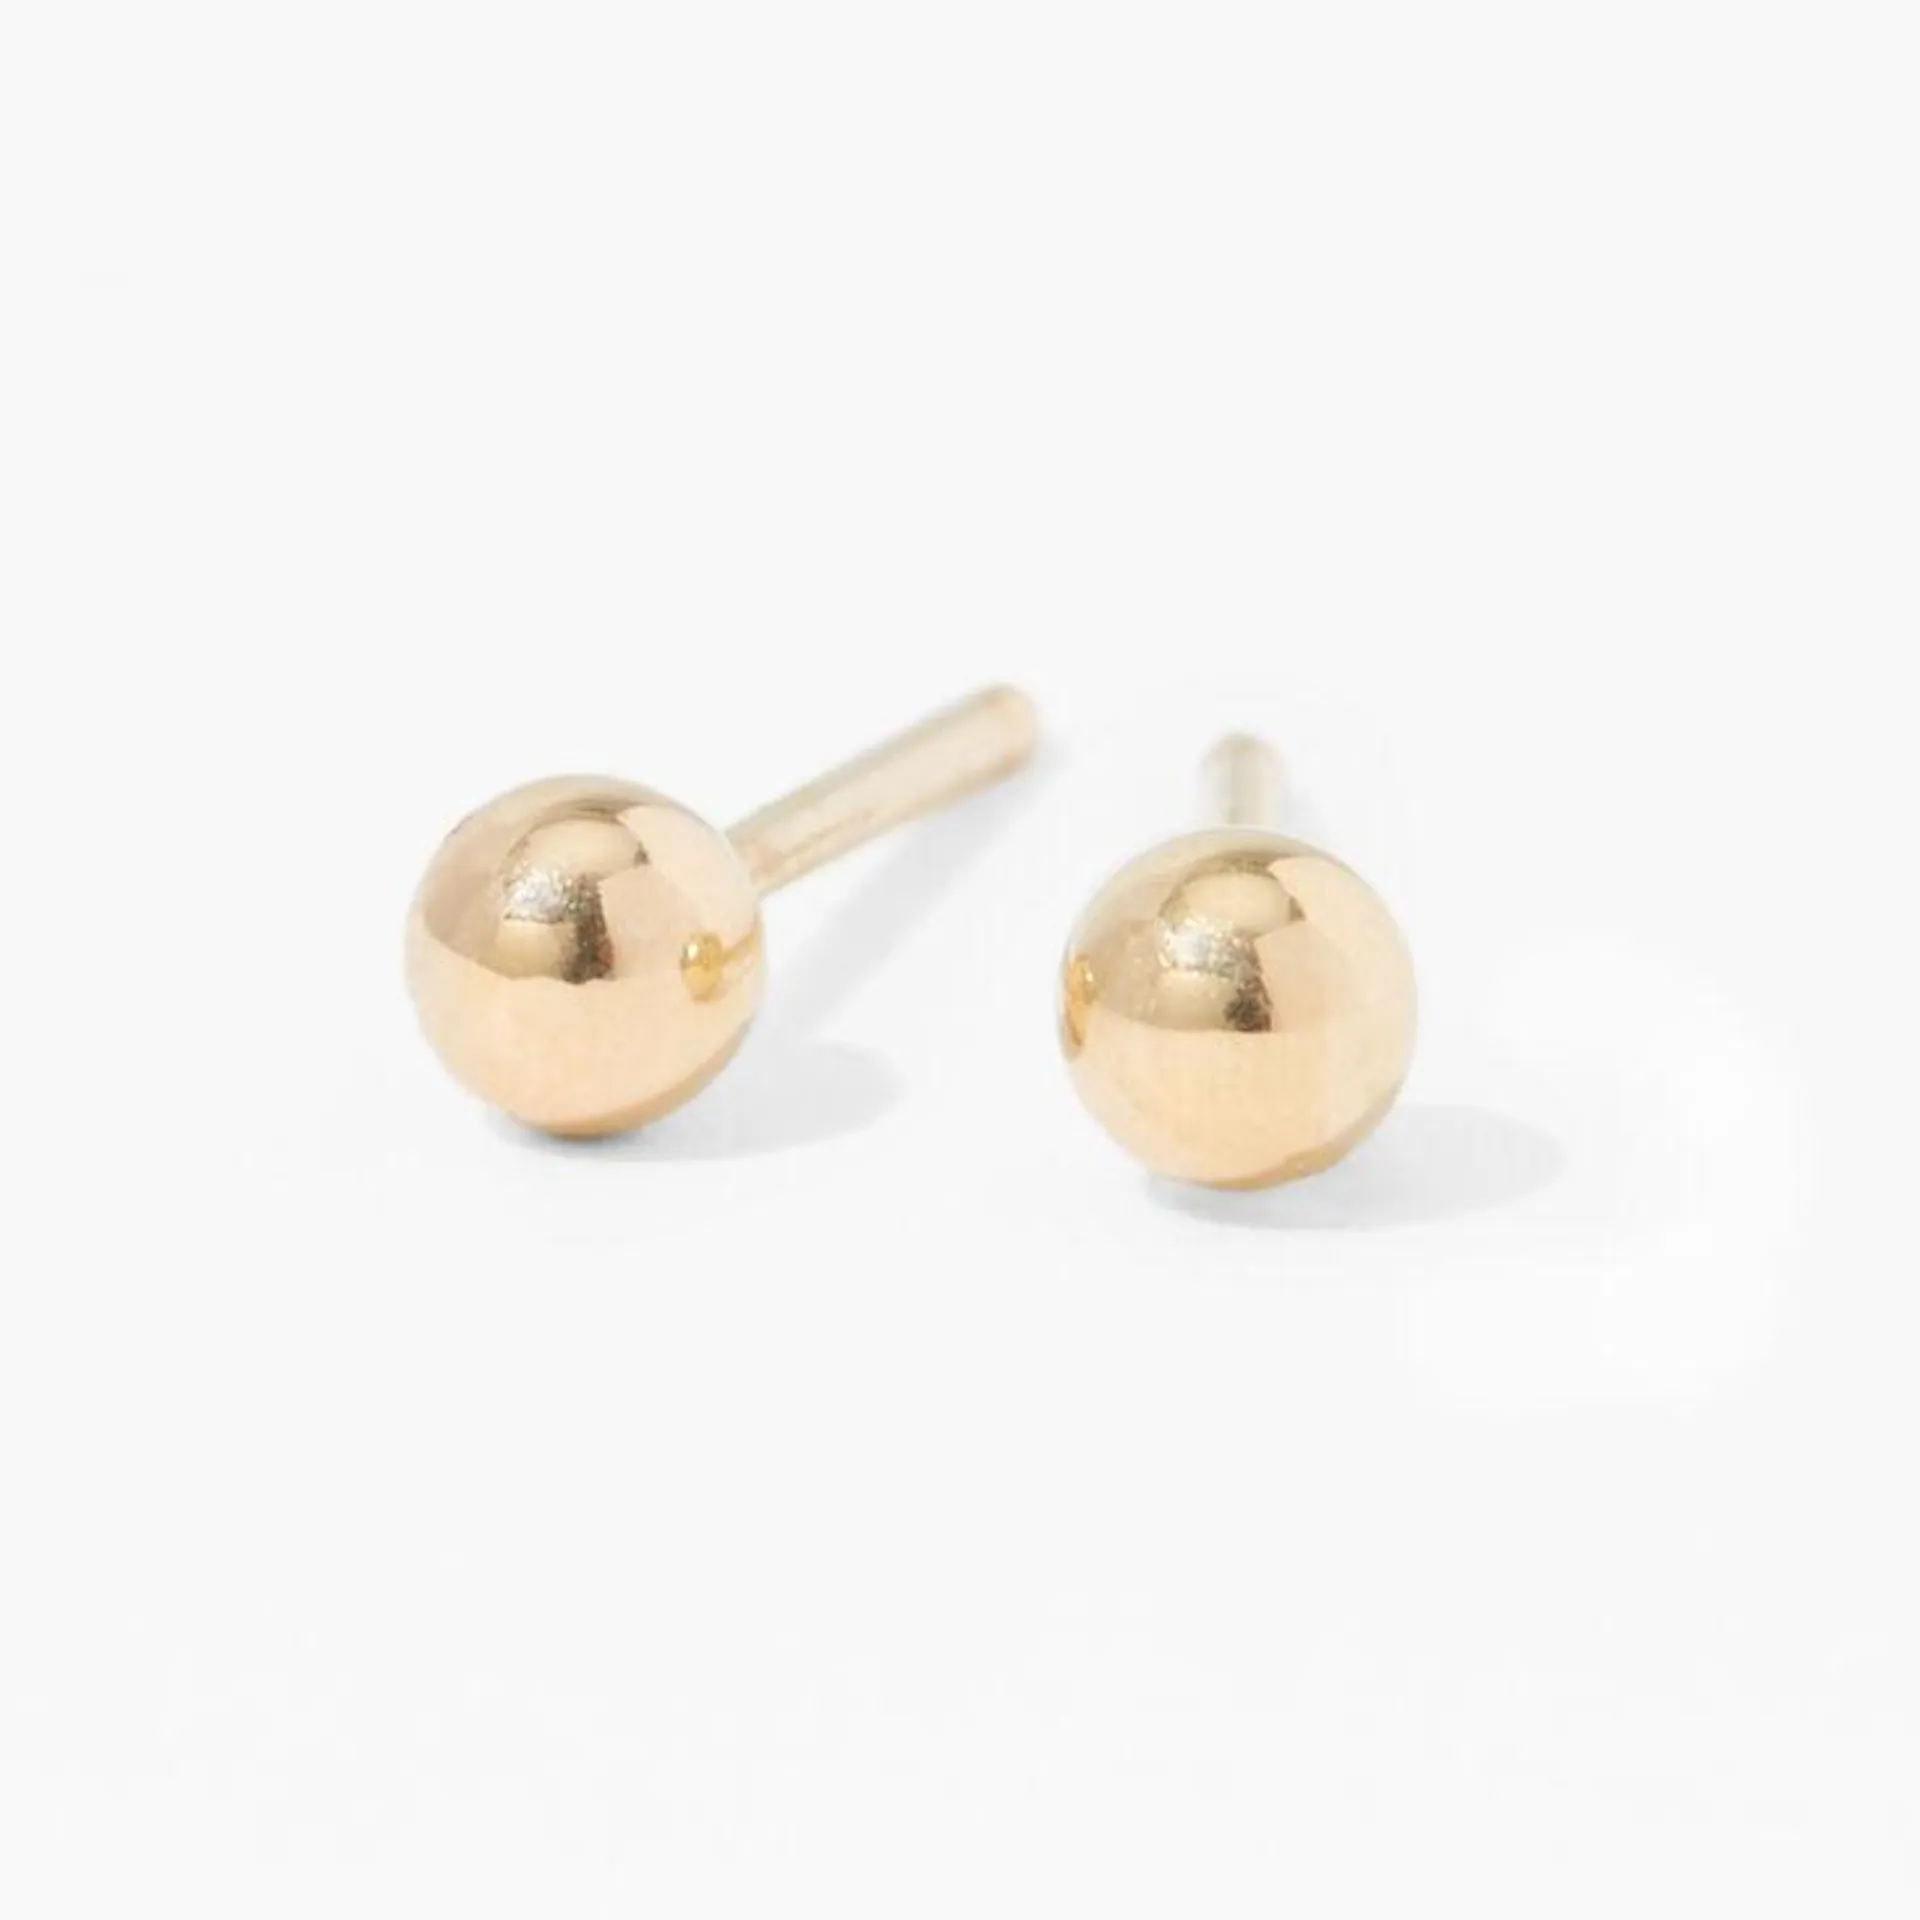 14kt Yellow Gold 3mm Ball Studs Ear Piercing Kit with Ear Care Solution